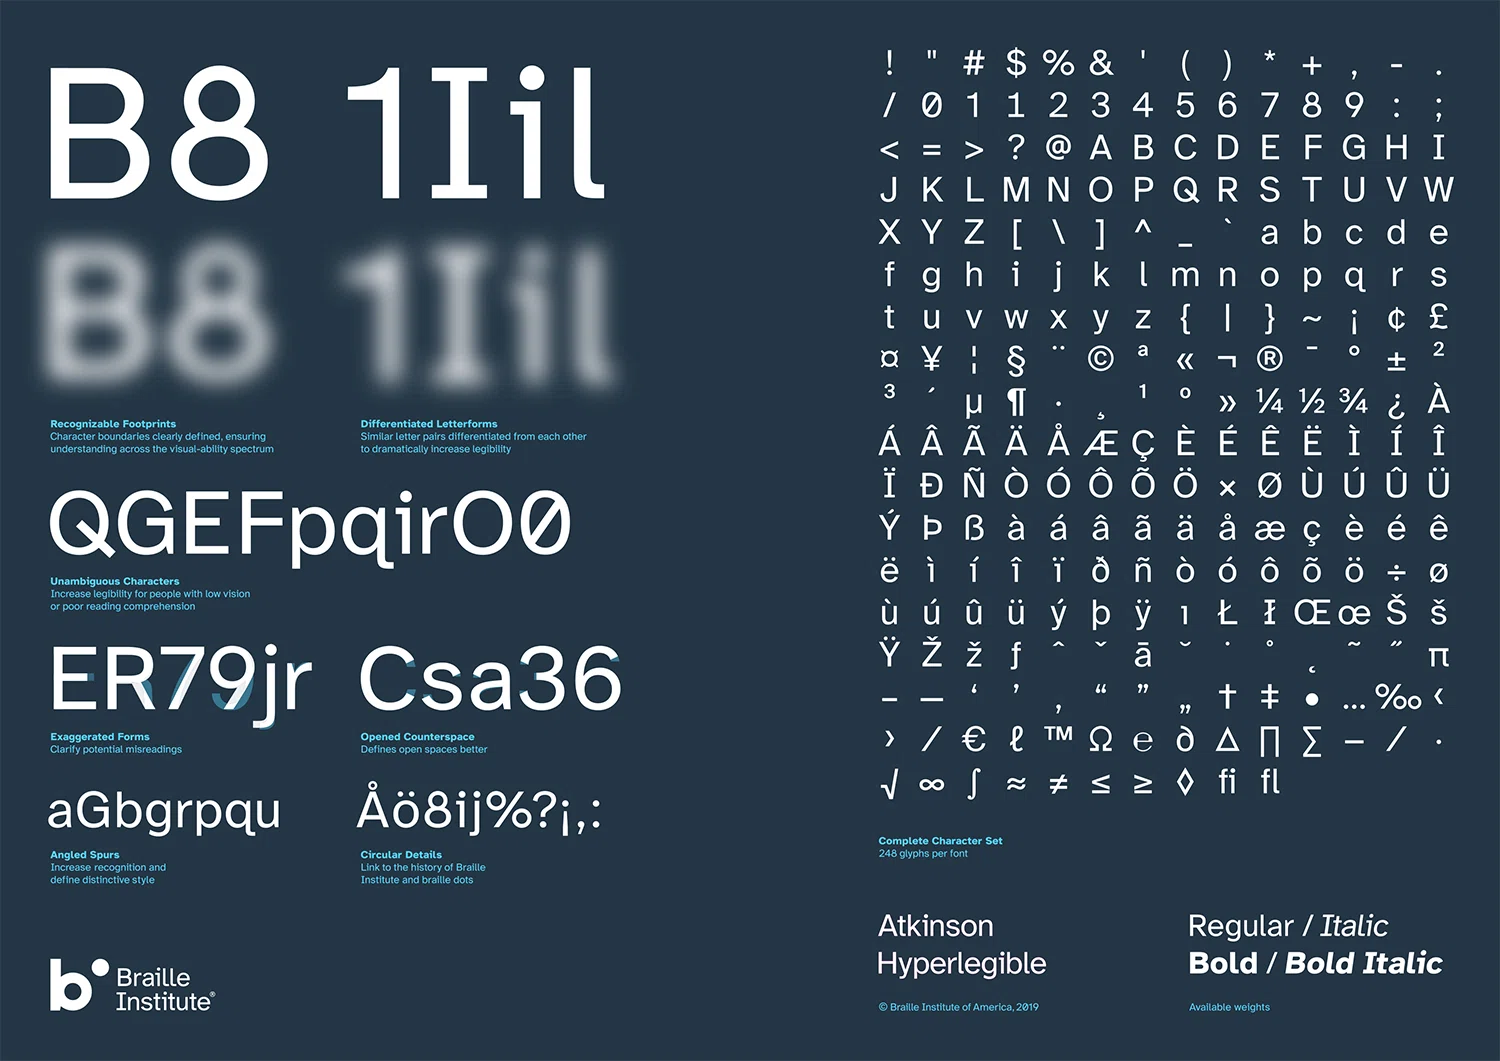 Applied Design Partners With Braille Institute To Design A Font For Those Who Are Visually Impaired